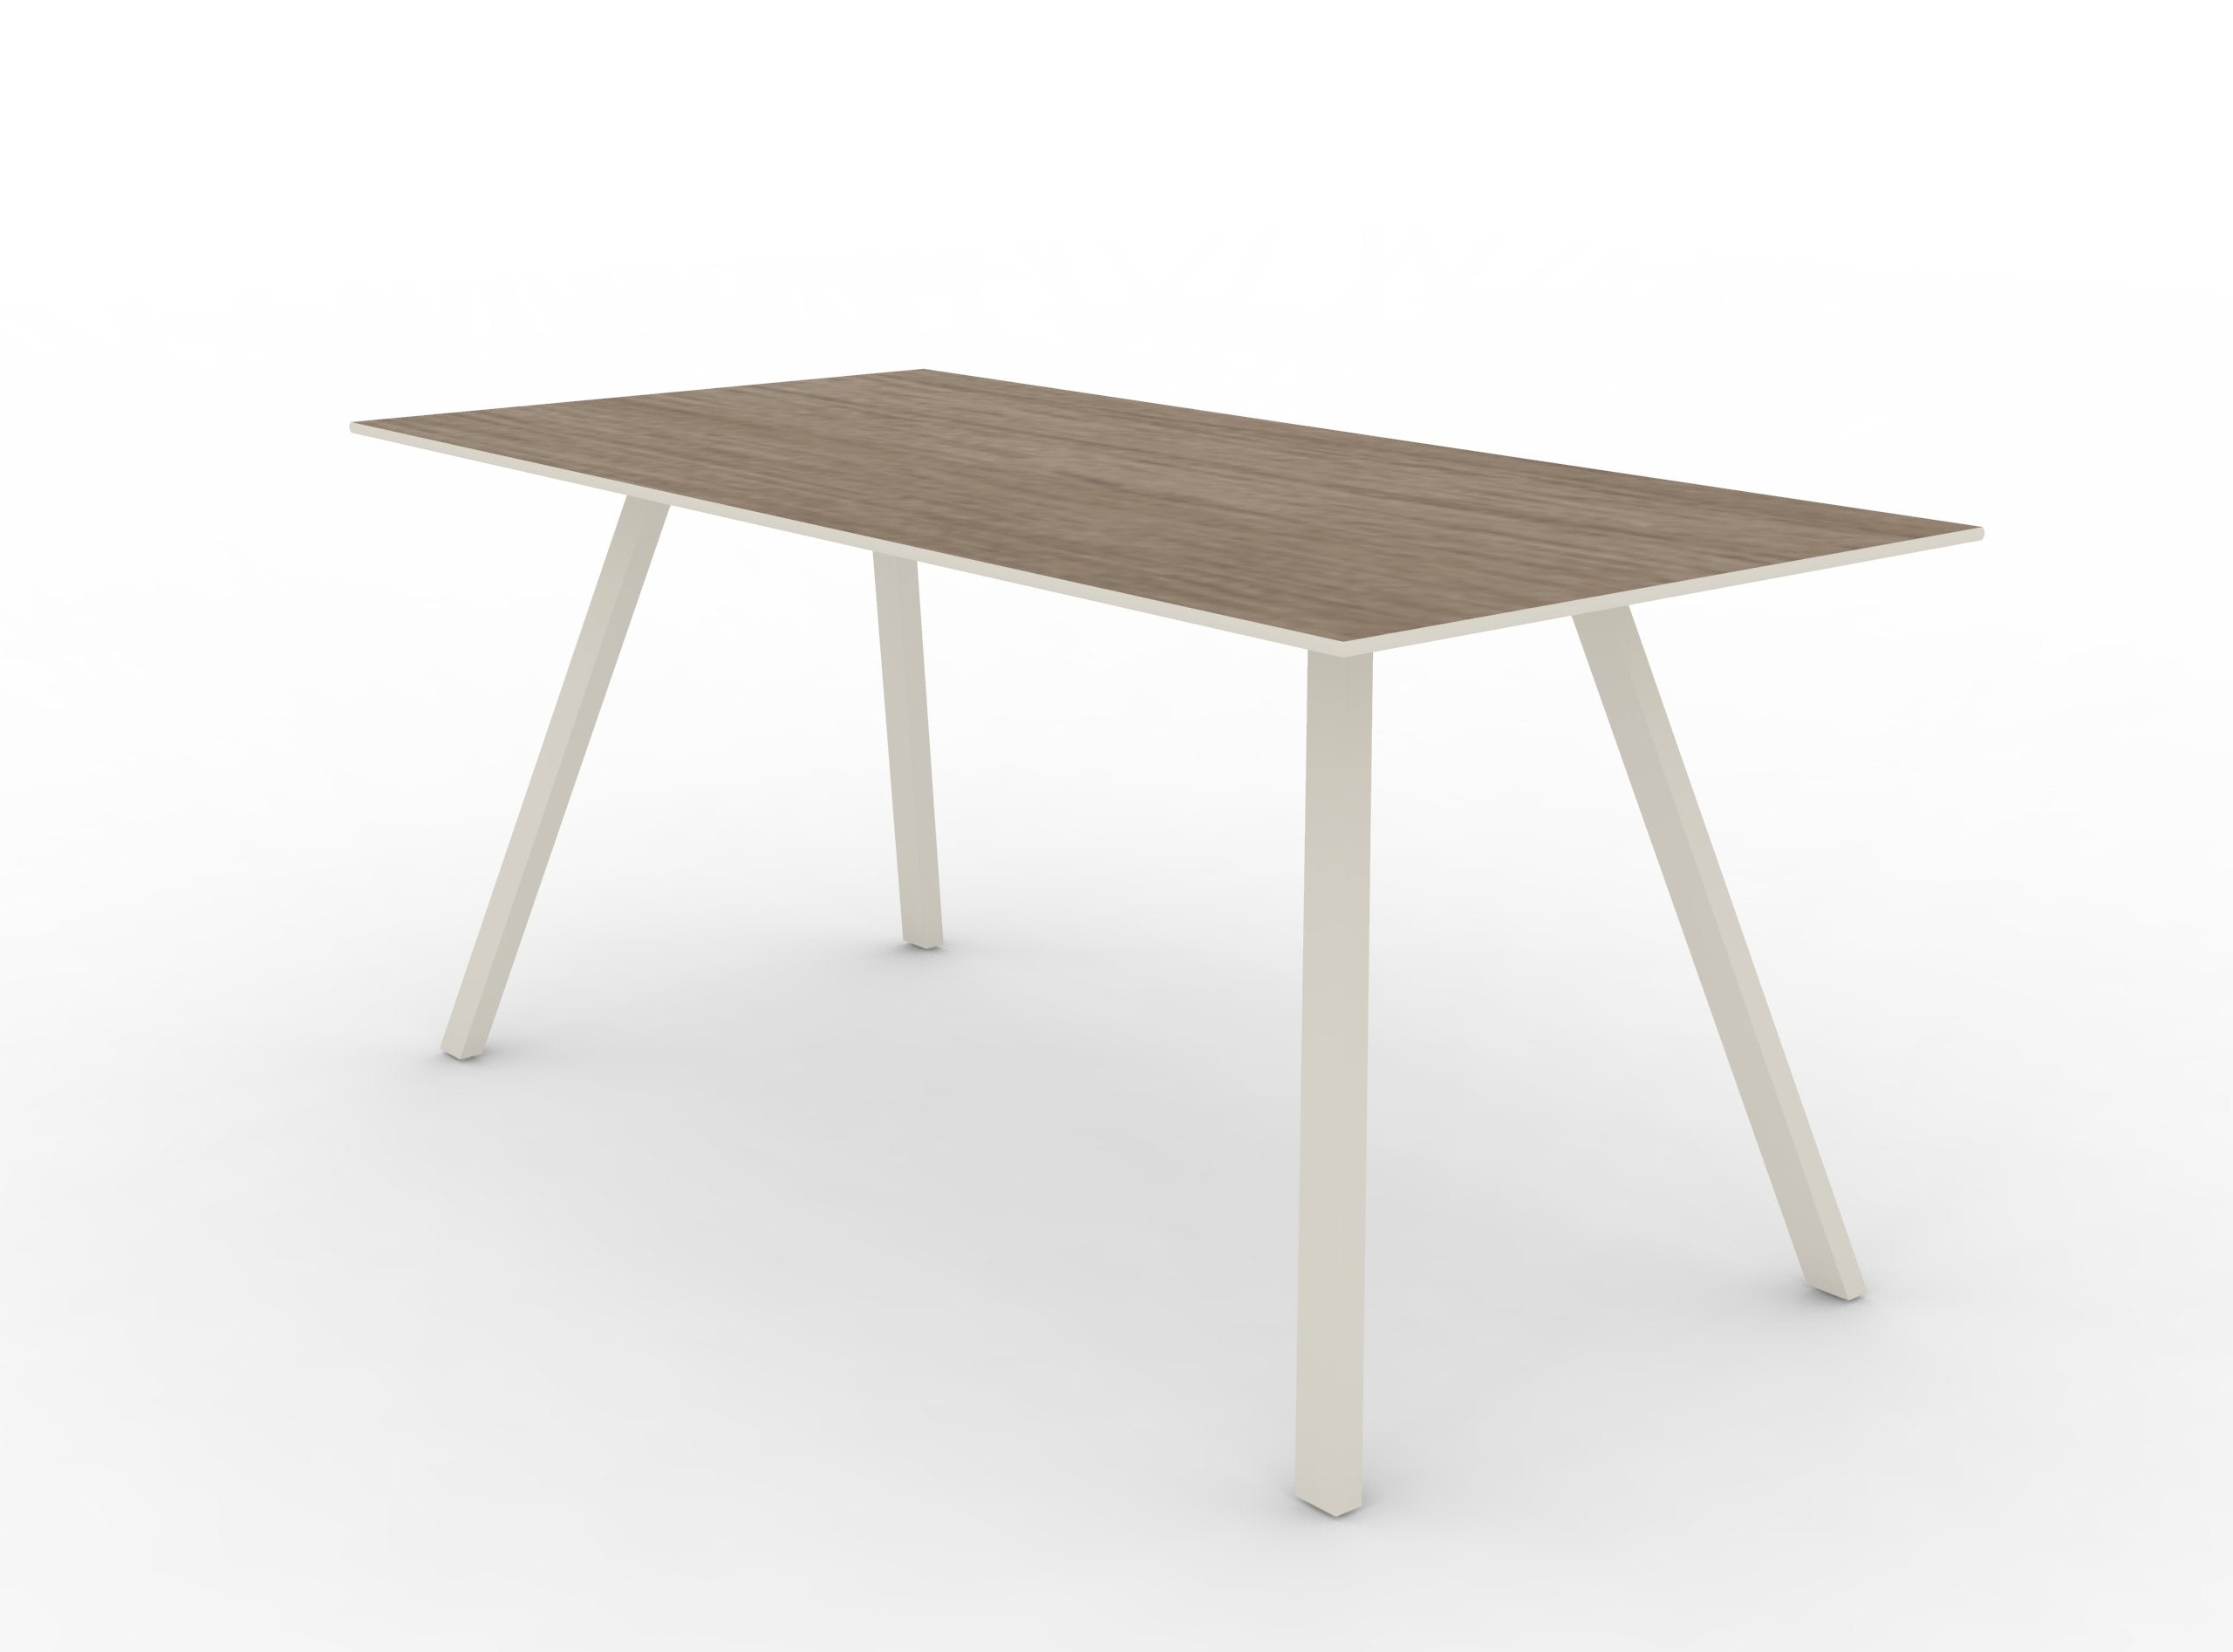 Amelia Dining Table